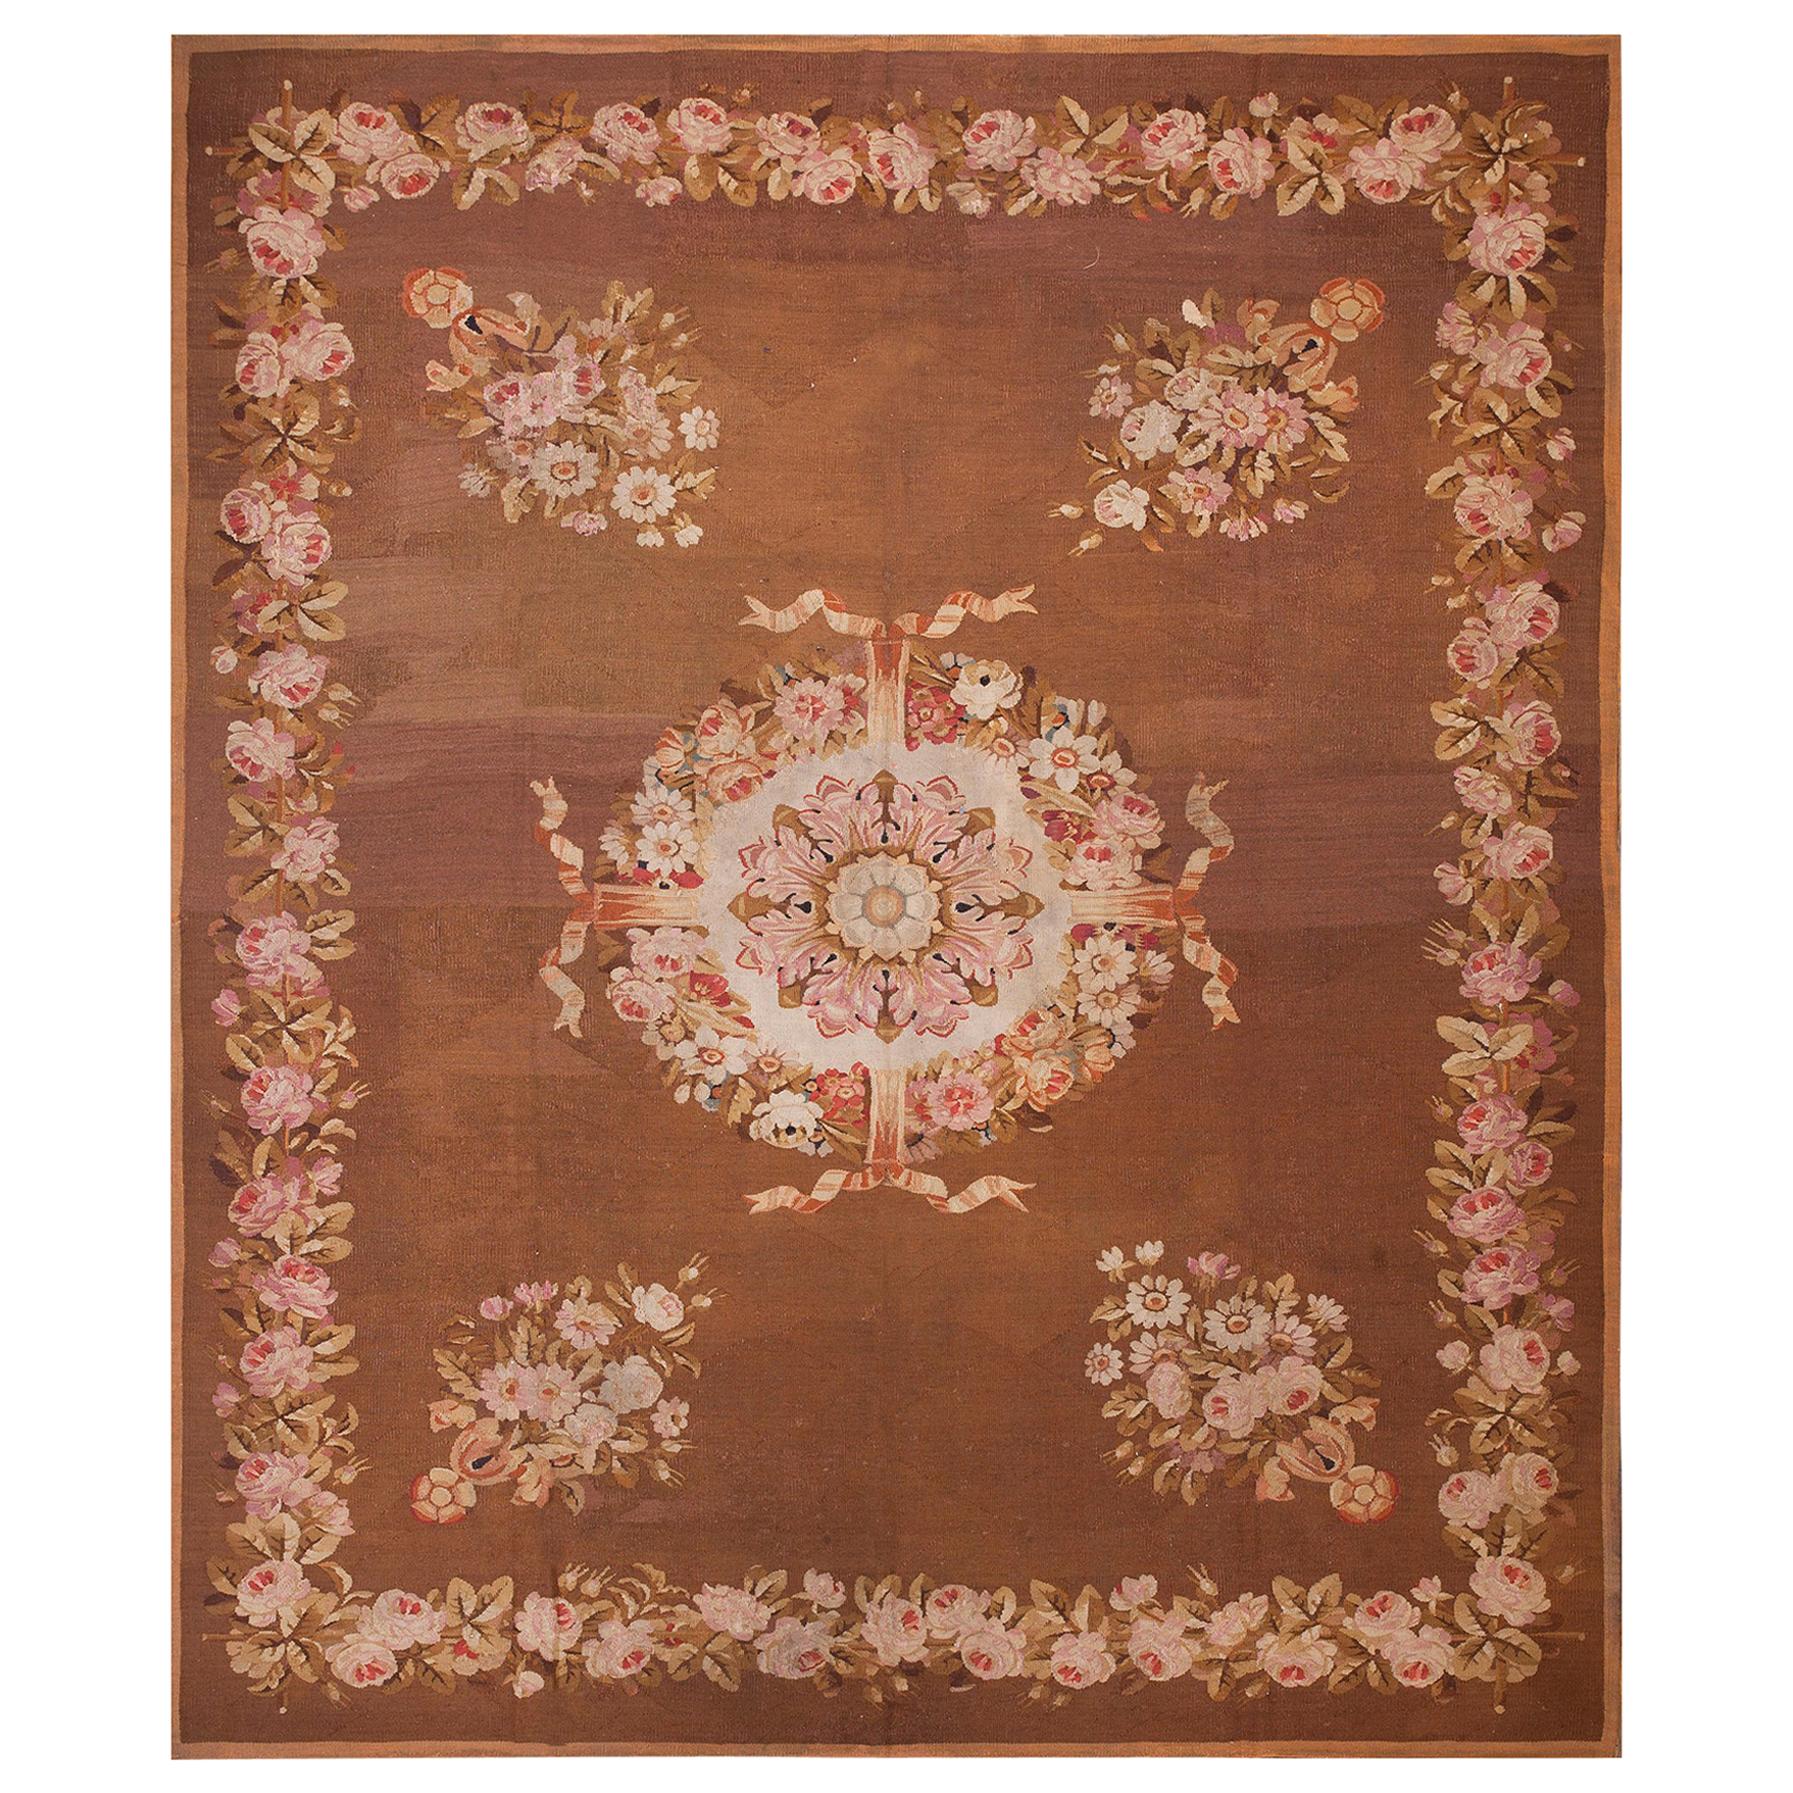 Early 19th Century French Empire Aubusson Carpet ( 8' x 9'3" - 245 x 282 )